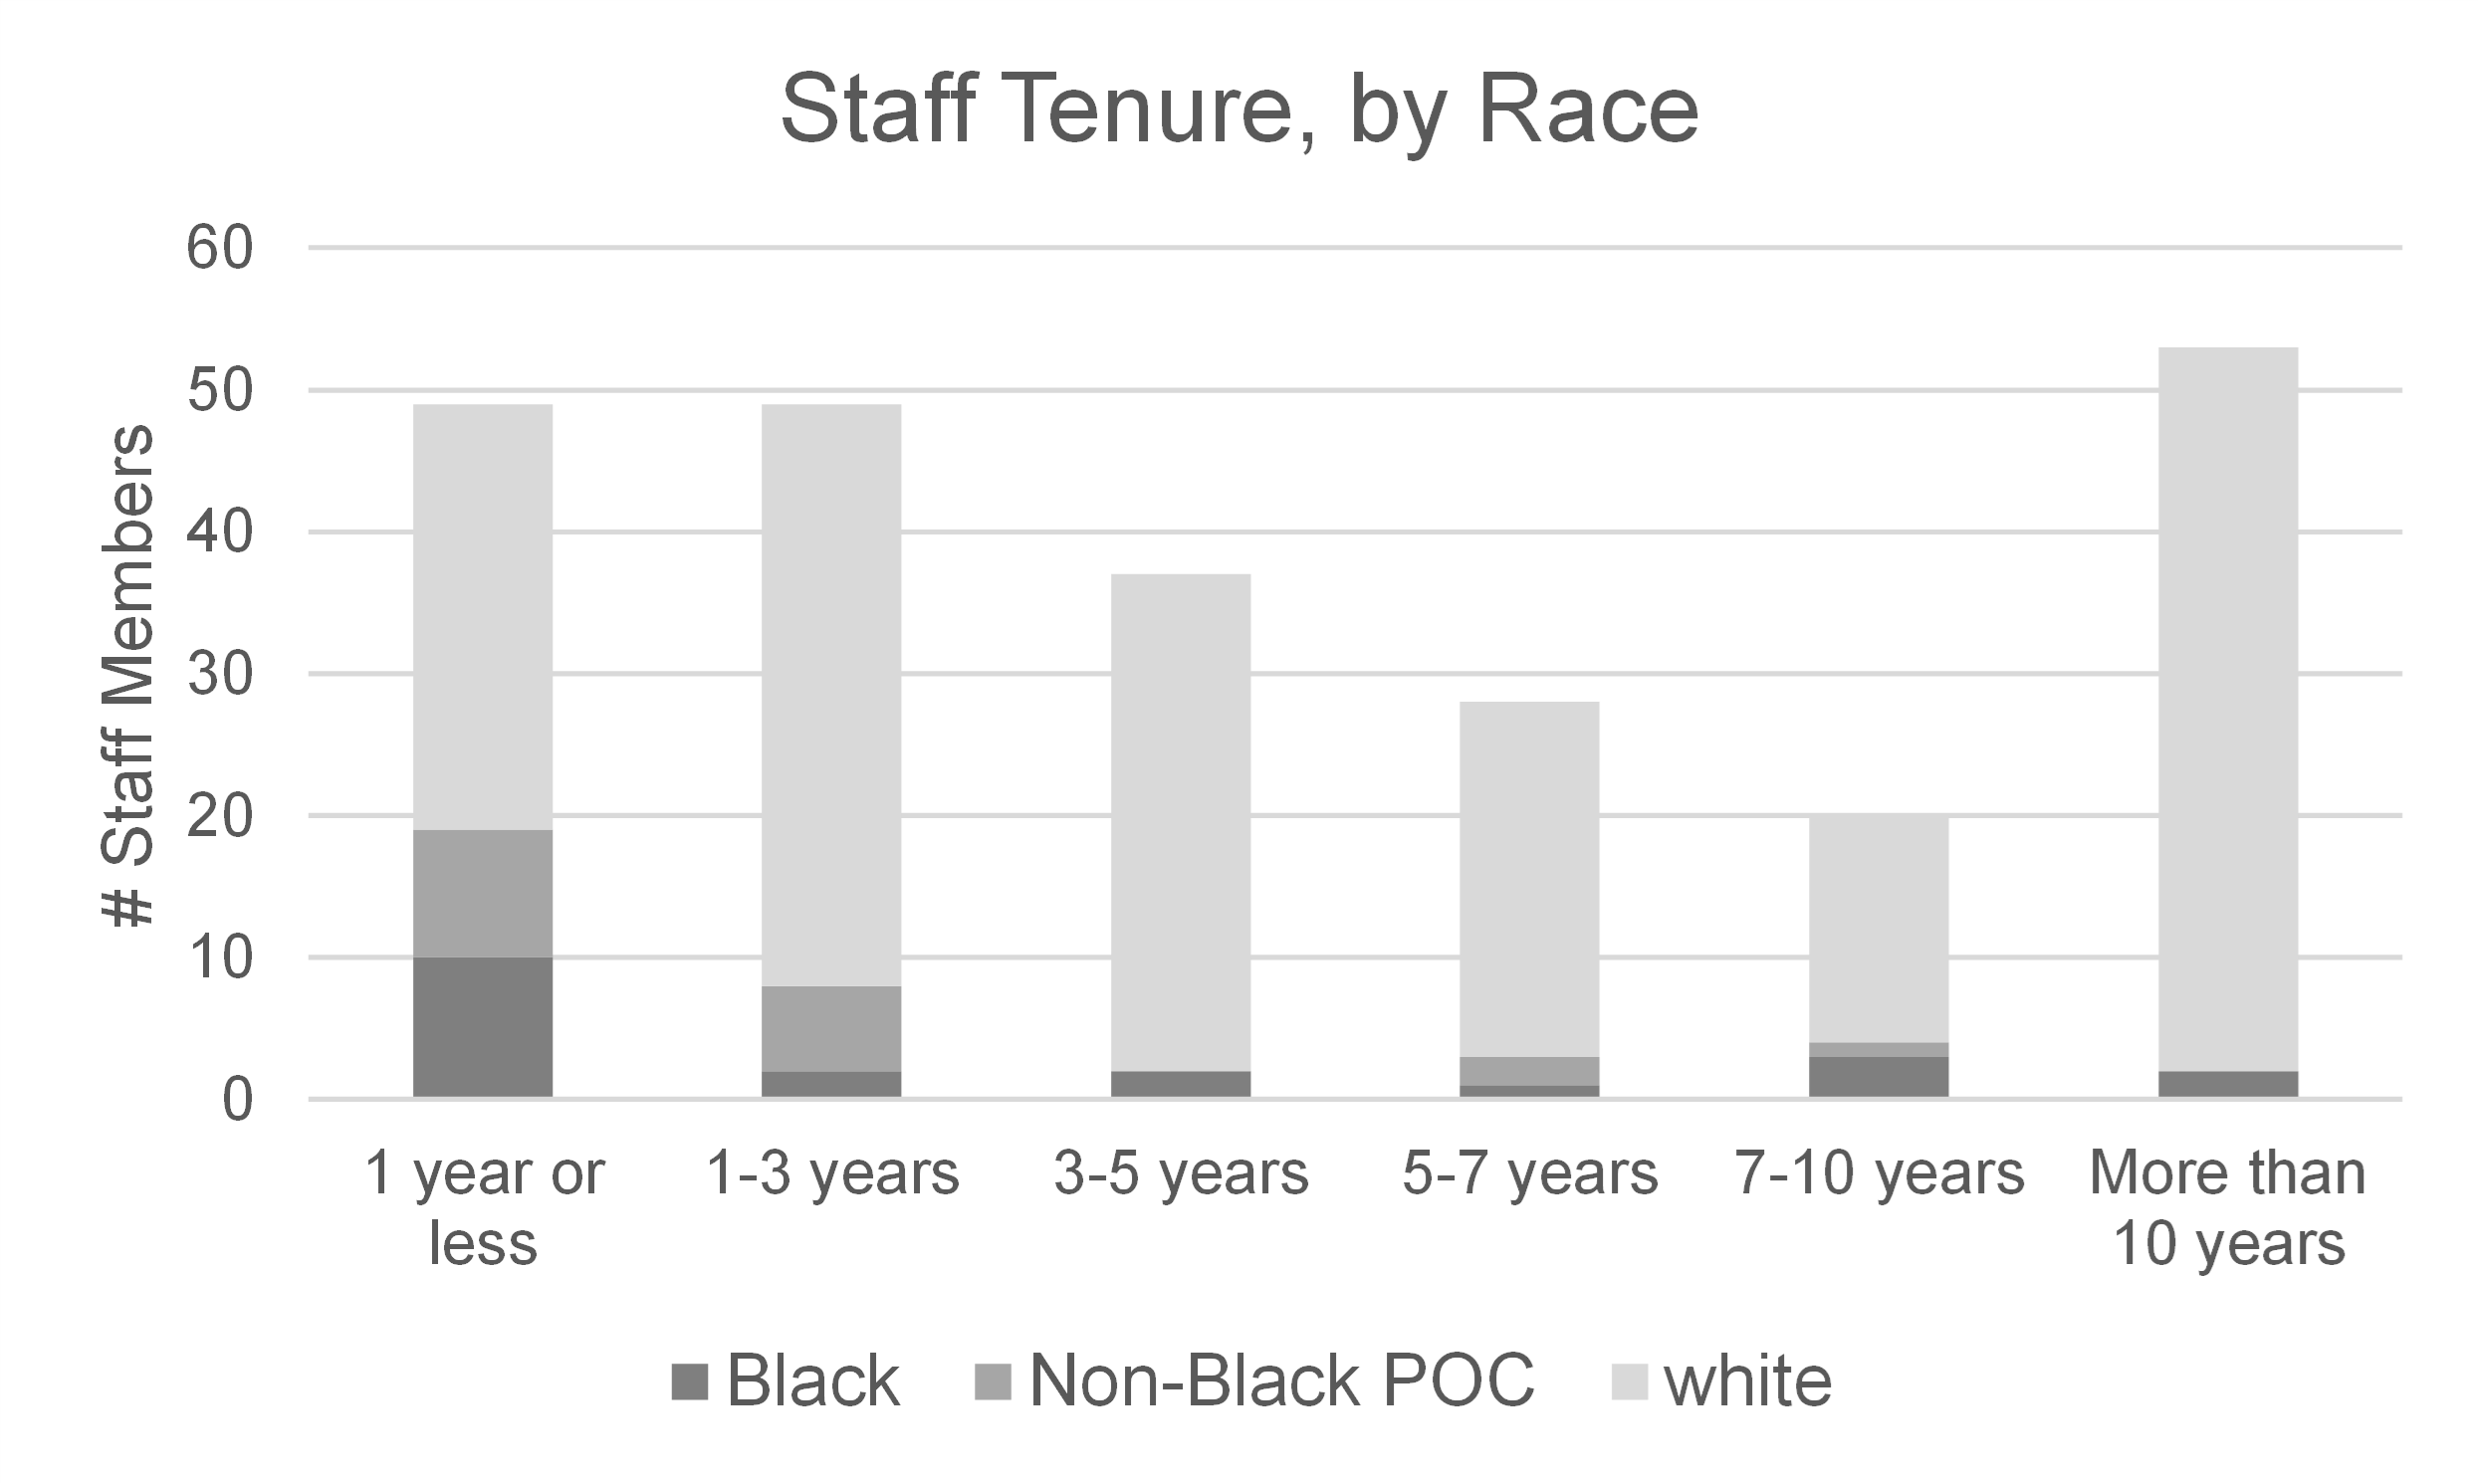 black staff represent 20% of new hires made last year